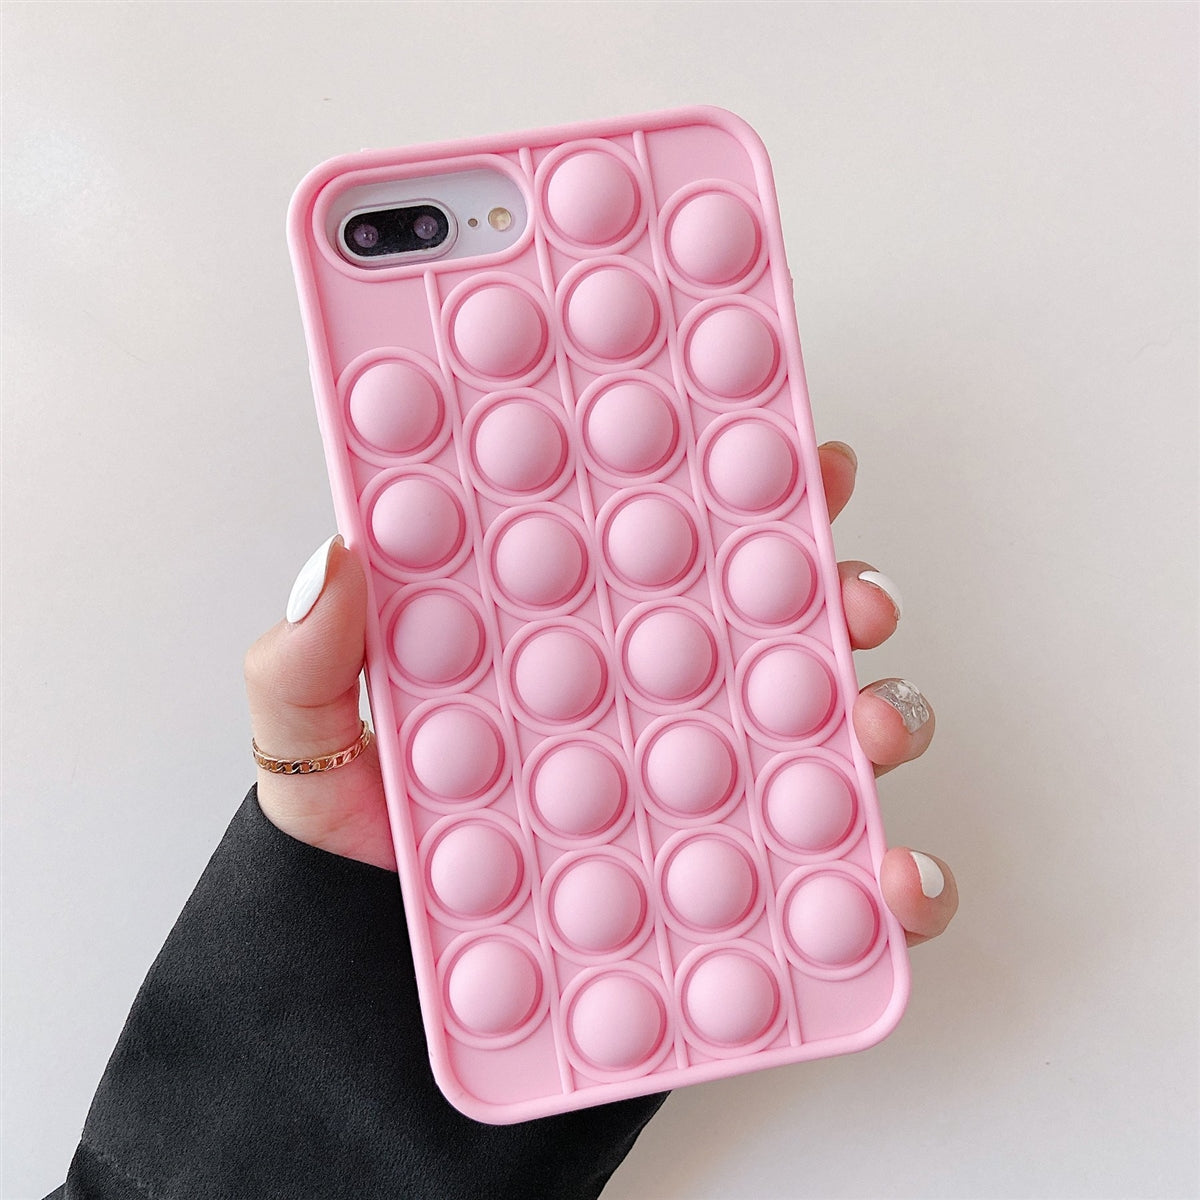 For Apple iPhone 12 Pro Max (6.7") Push Pop Silicone Case Pink